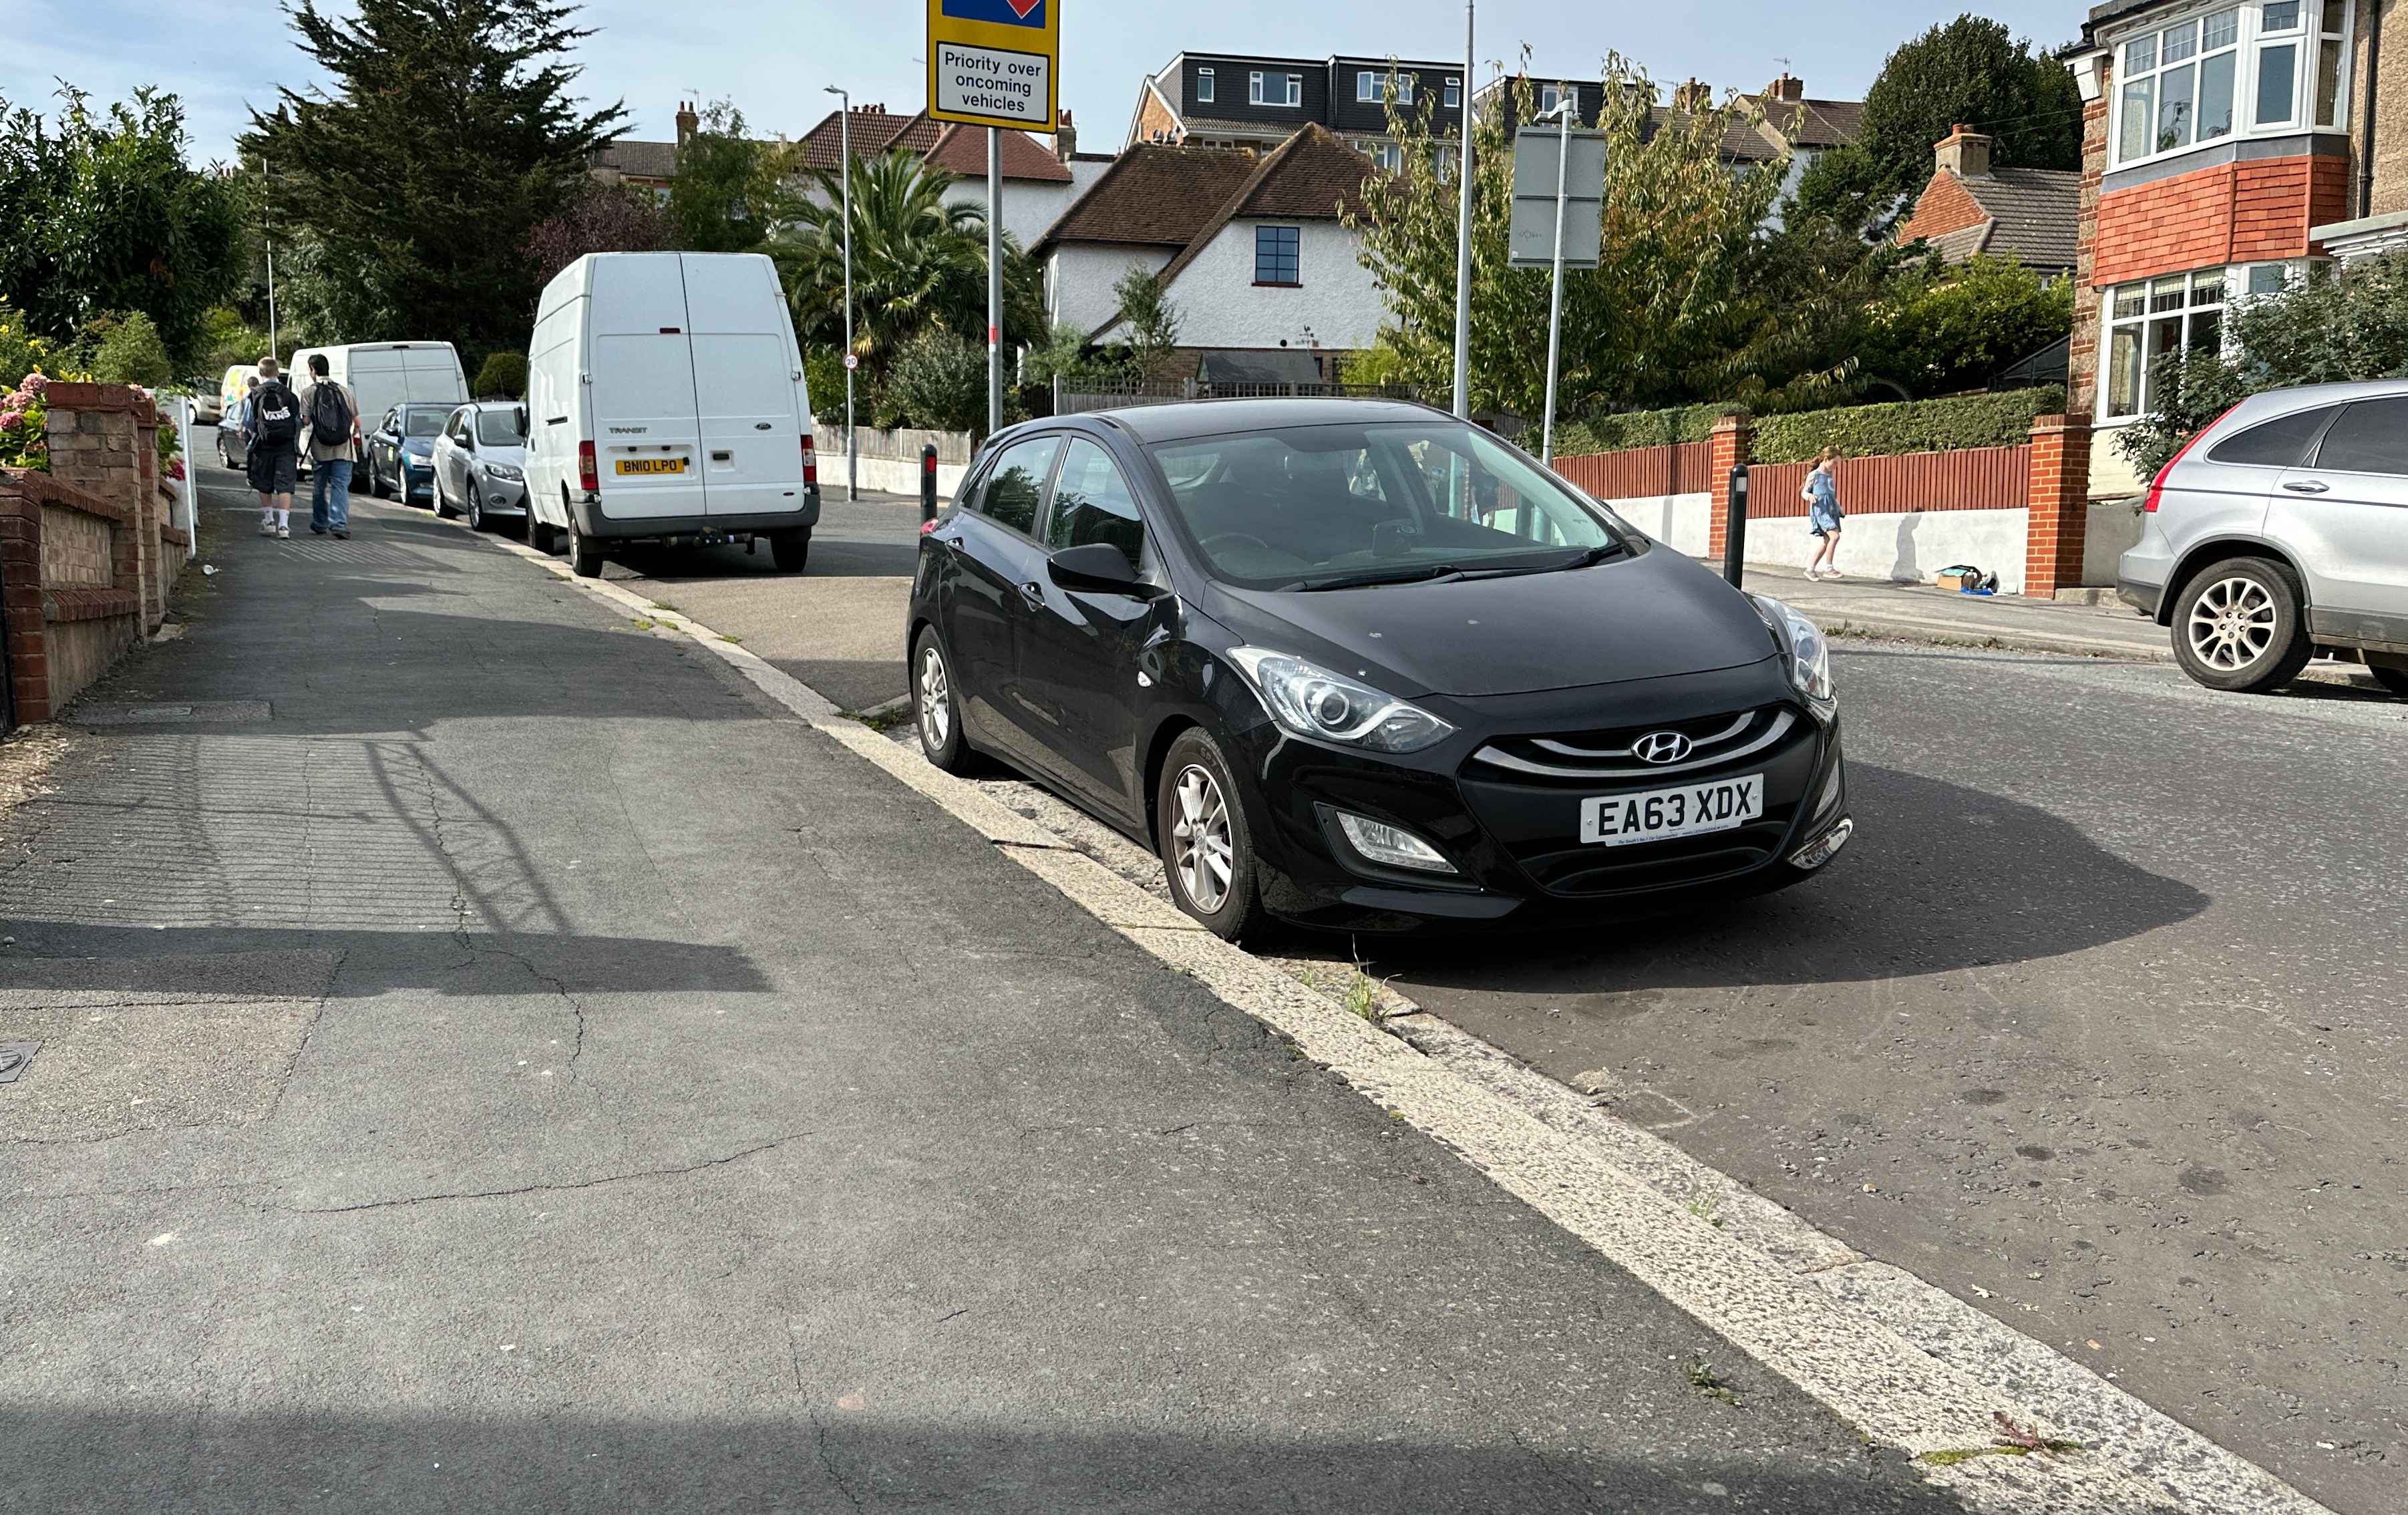 Photograph of EA63 XDX - a Black Hyundai i30 parked in Hollingdean by a non-resident. The first of two photographs supplied by the residents of Hollingdean.